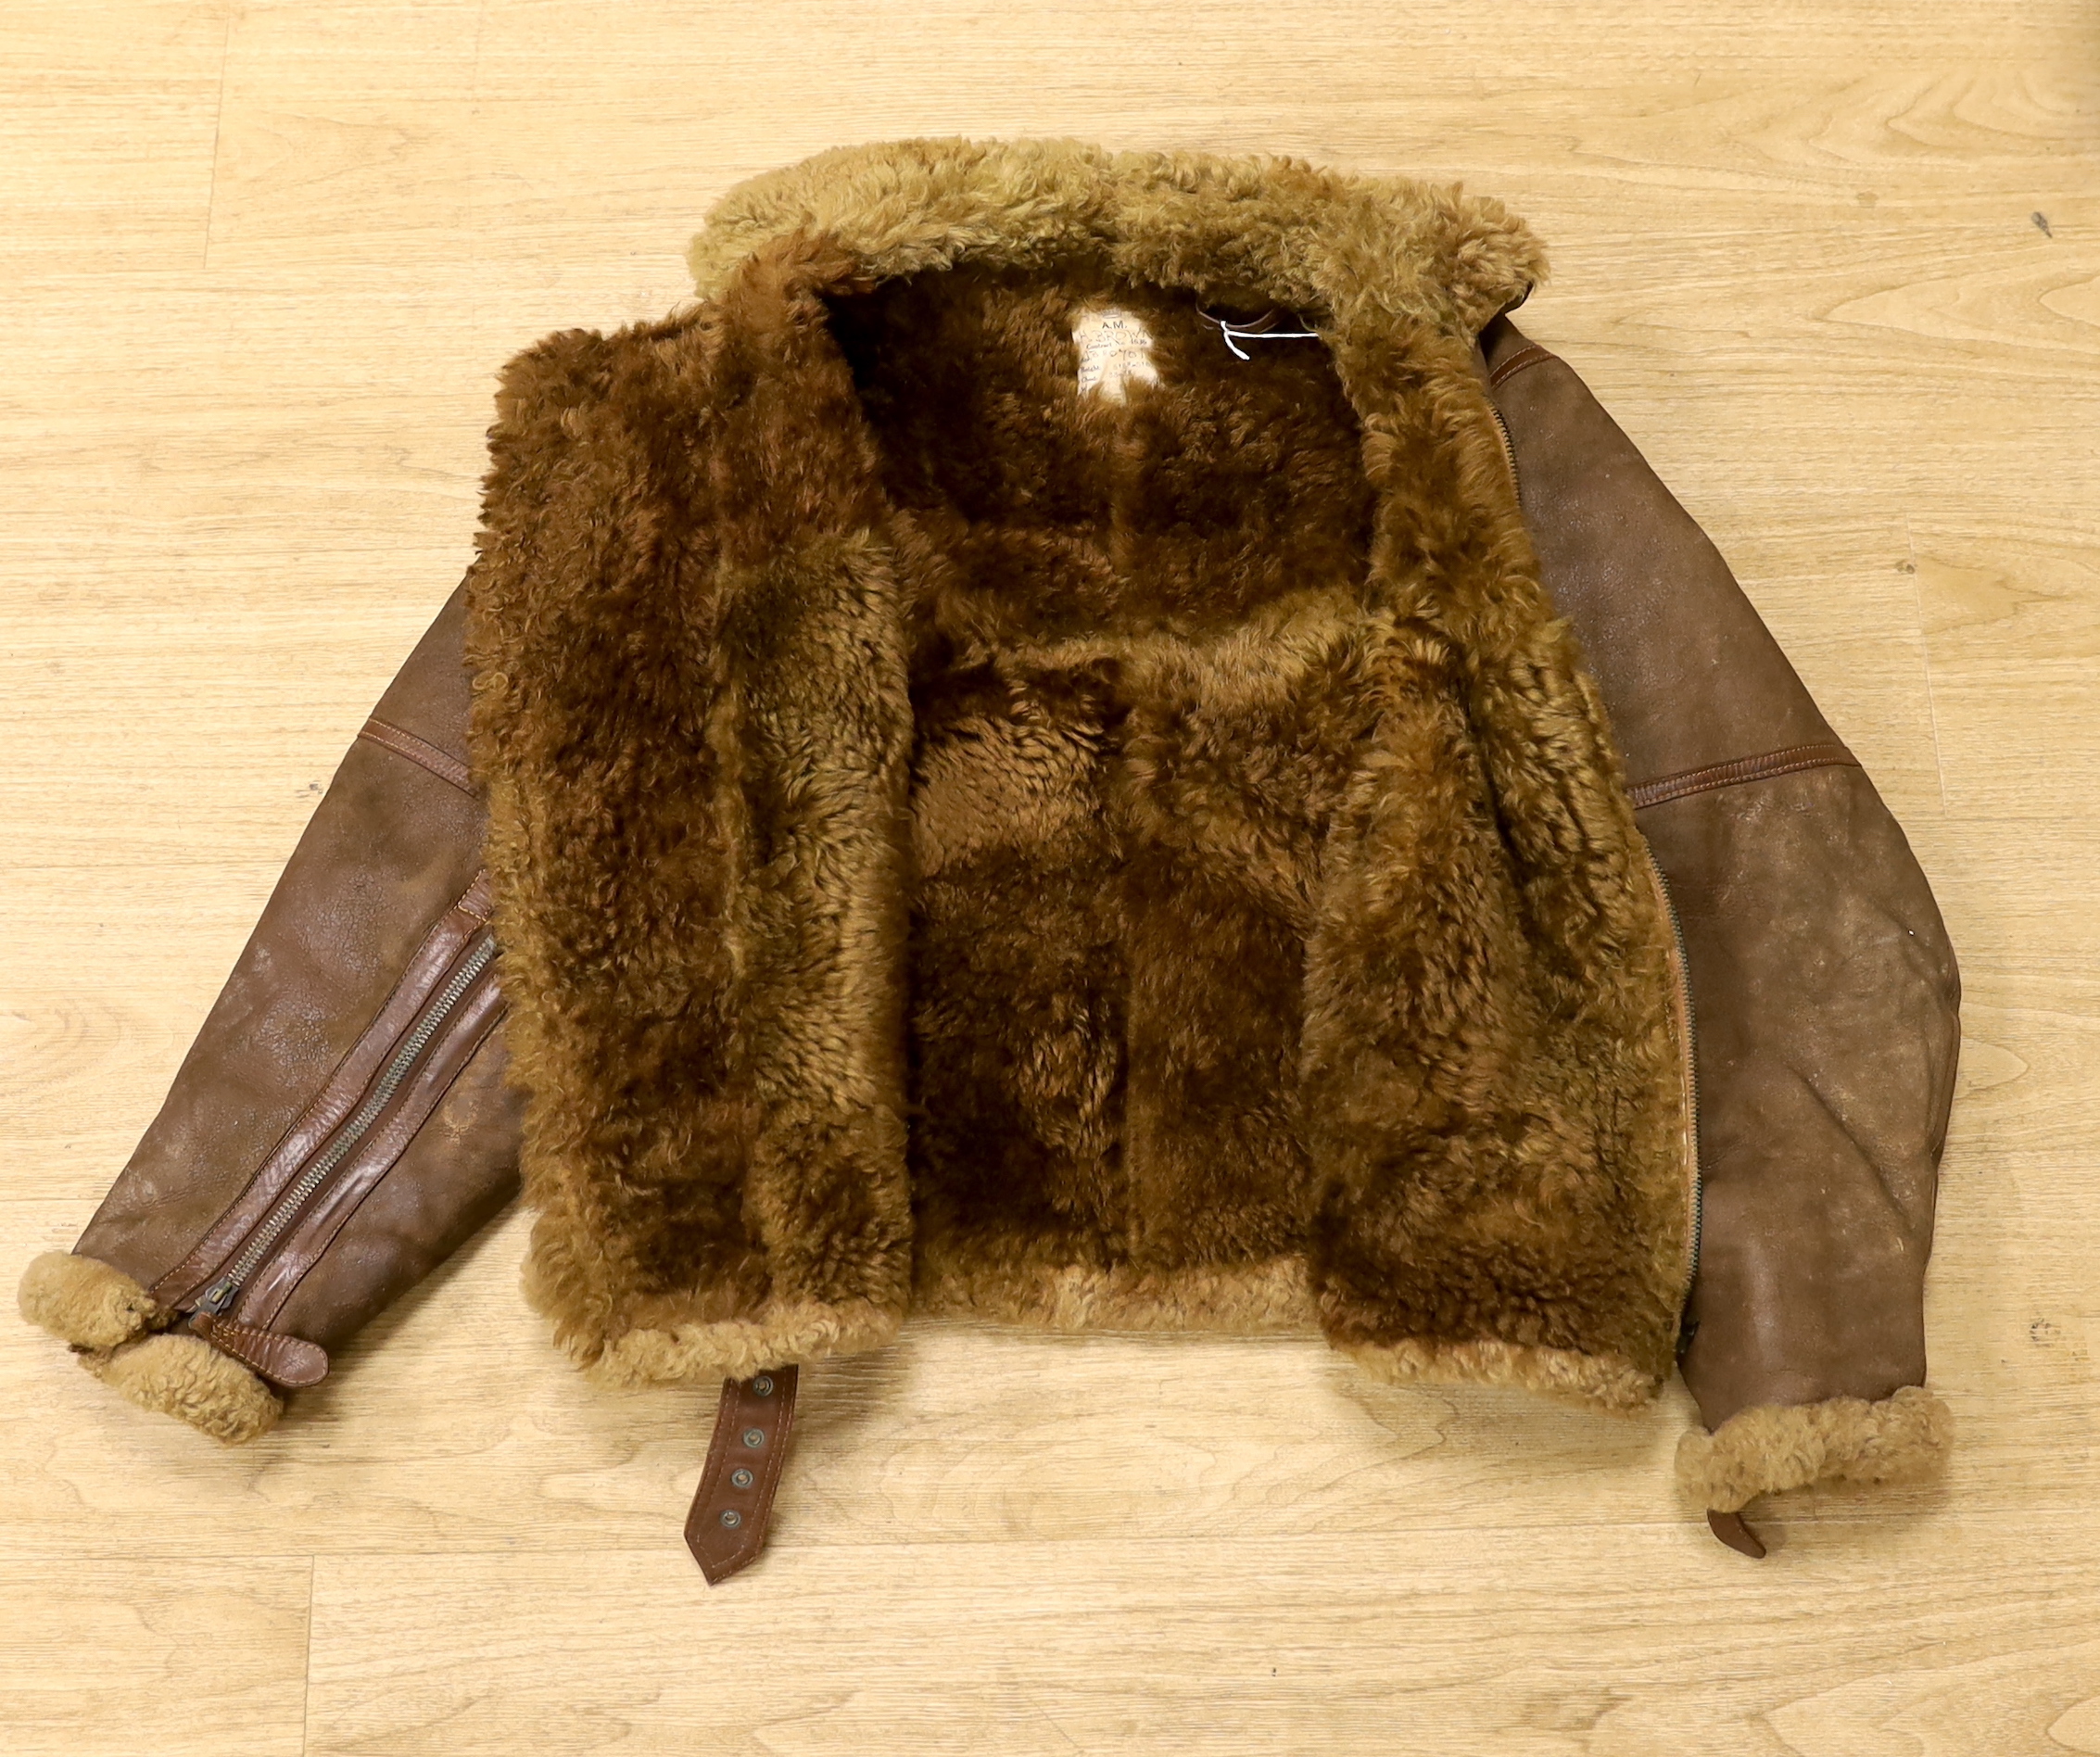 A WWII Air Ministry issue RAF sheepskin flying jacket, with original label stating; ‘AM Contract No.4636, Size: 2, Height: 5’5”-5’6”, Chest: 33-35, Waist: 30-32’, added in pen; H. Brown 130701, provenance - by family des